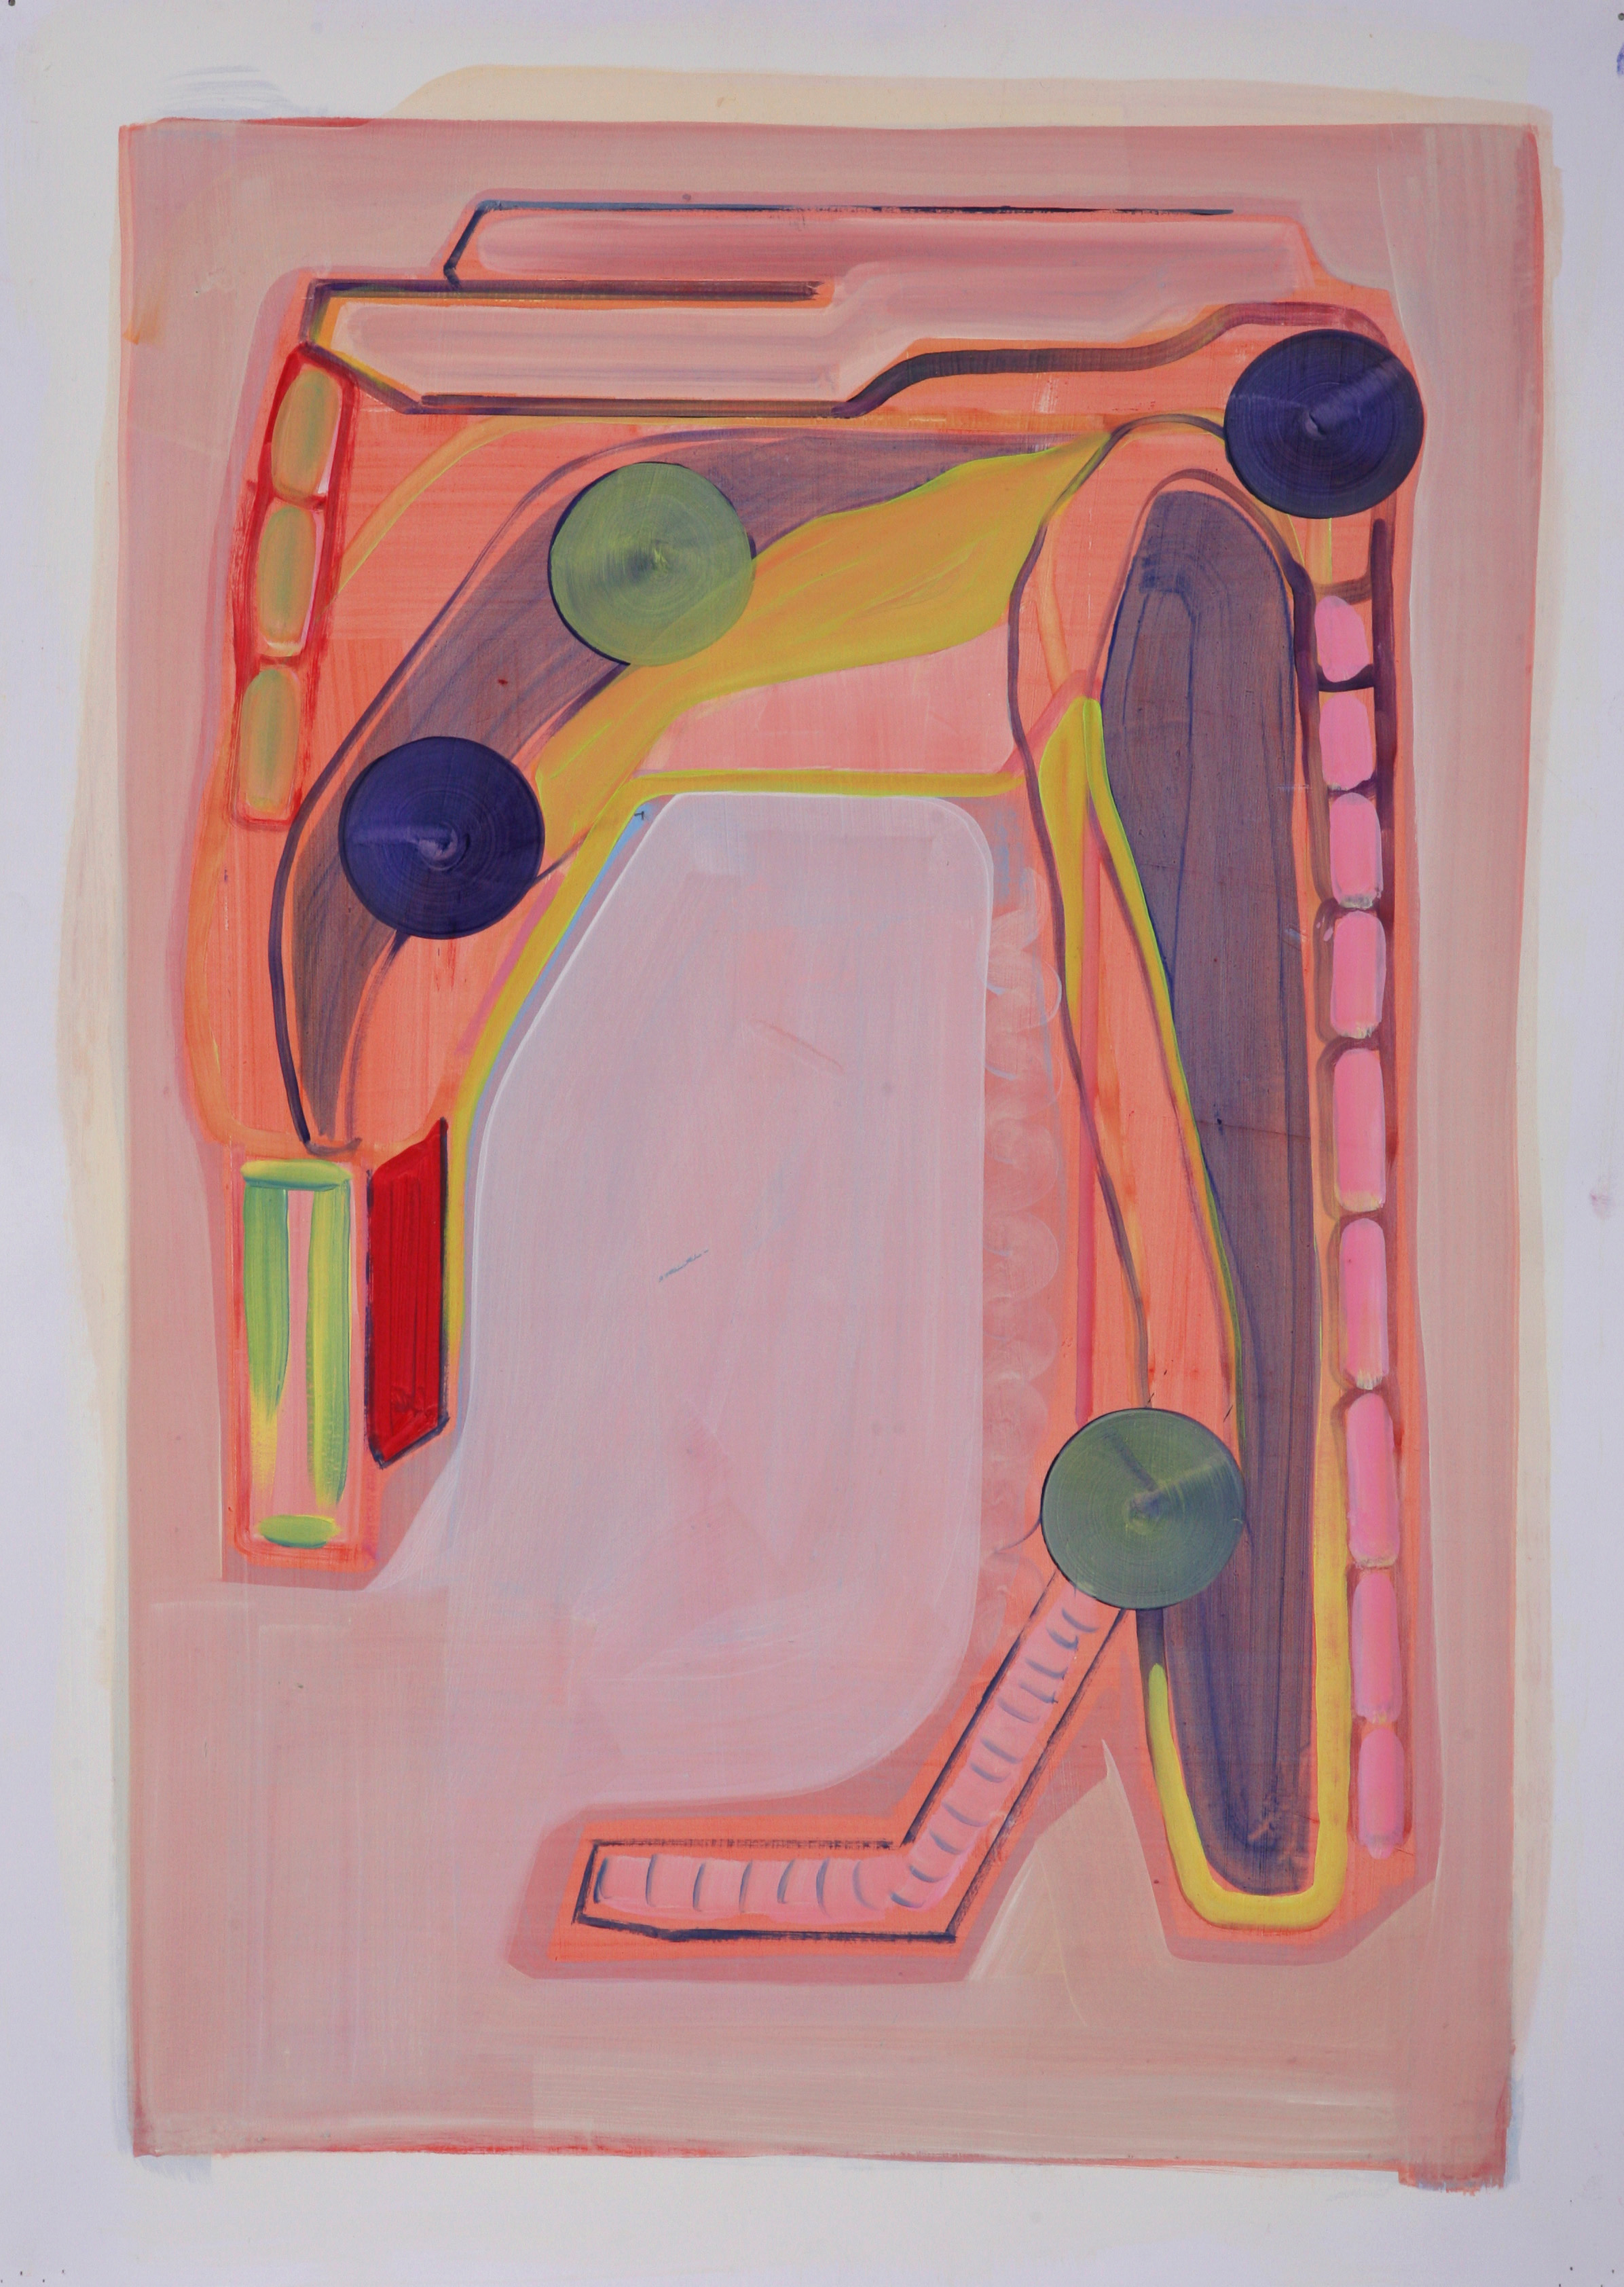  Untitled (hanging), 2013, oil on paper, 59cm x 42cm 